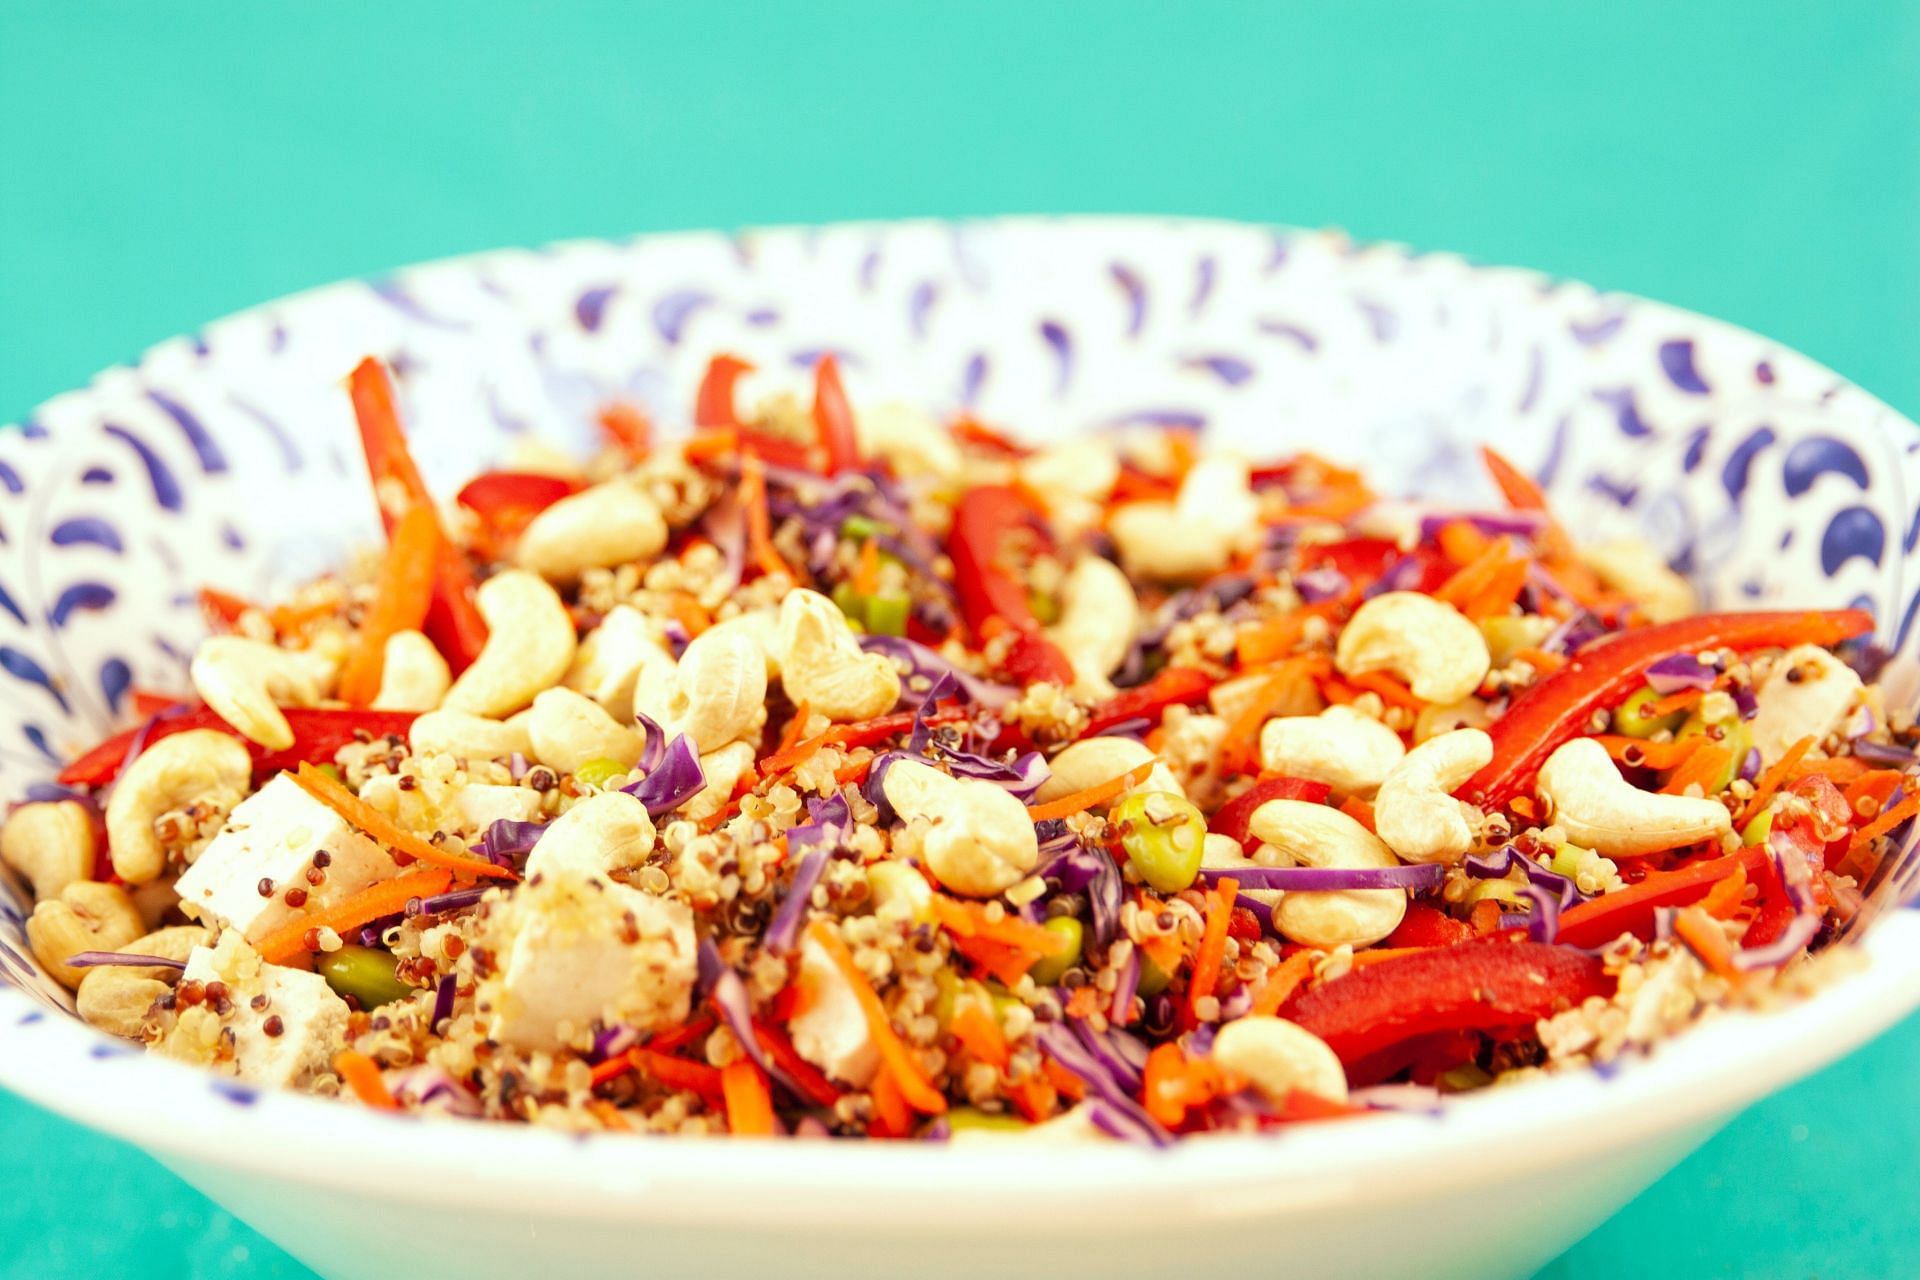 Quinoa and its benefits (image sourced via Pexels / Photo by Karen)